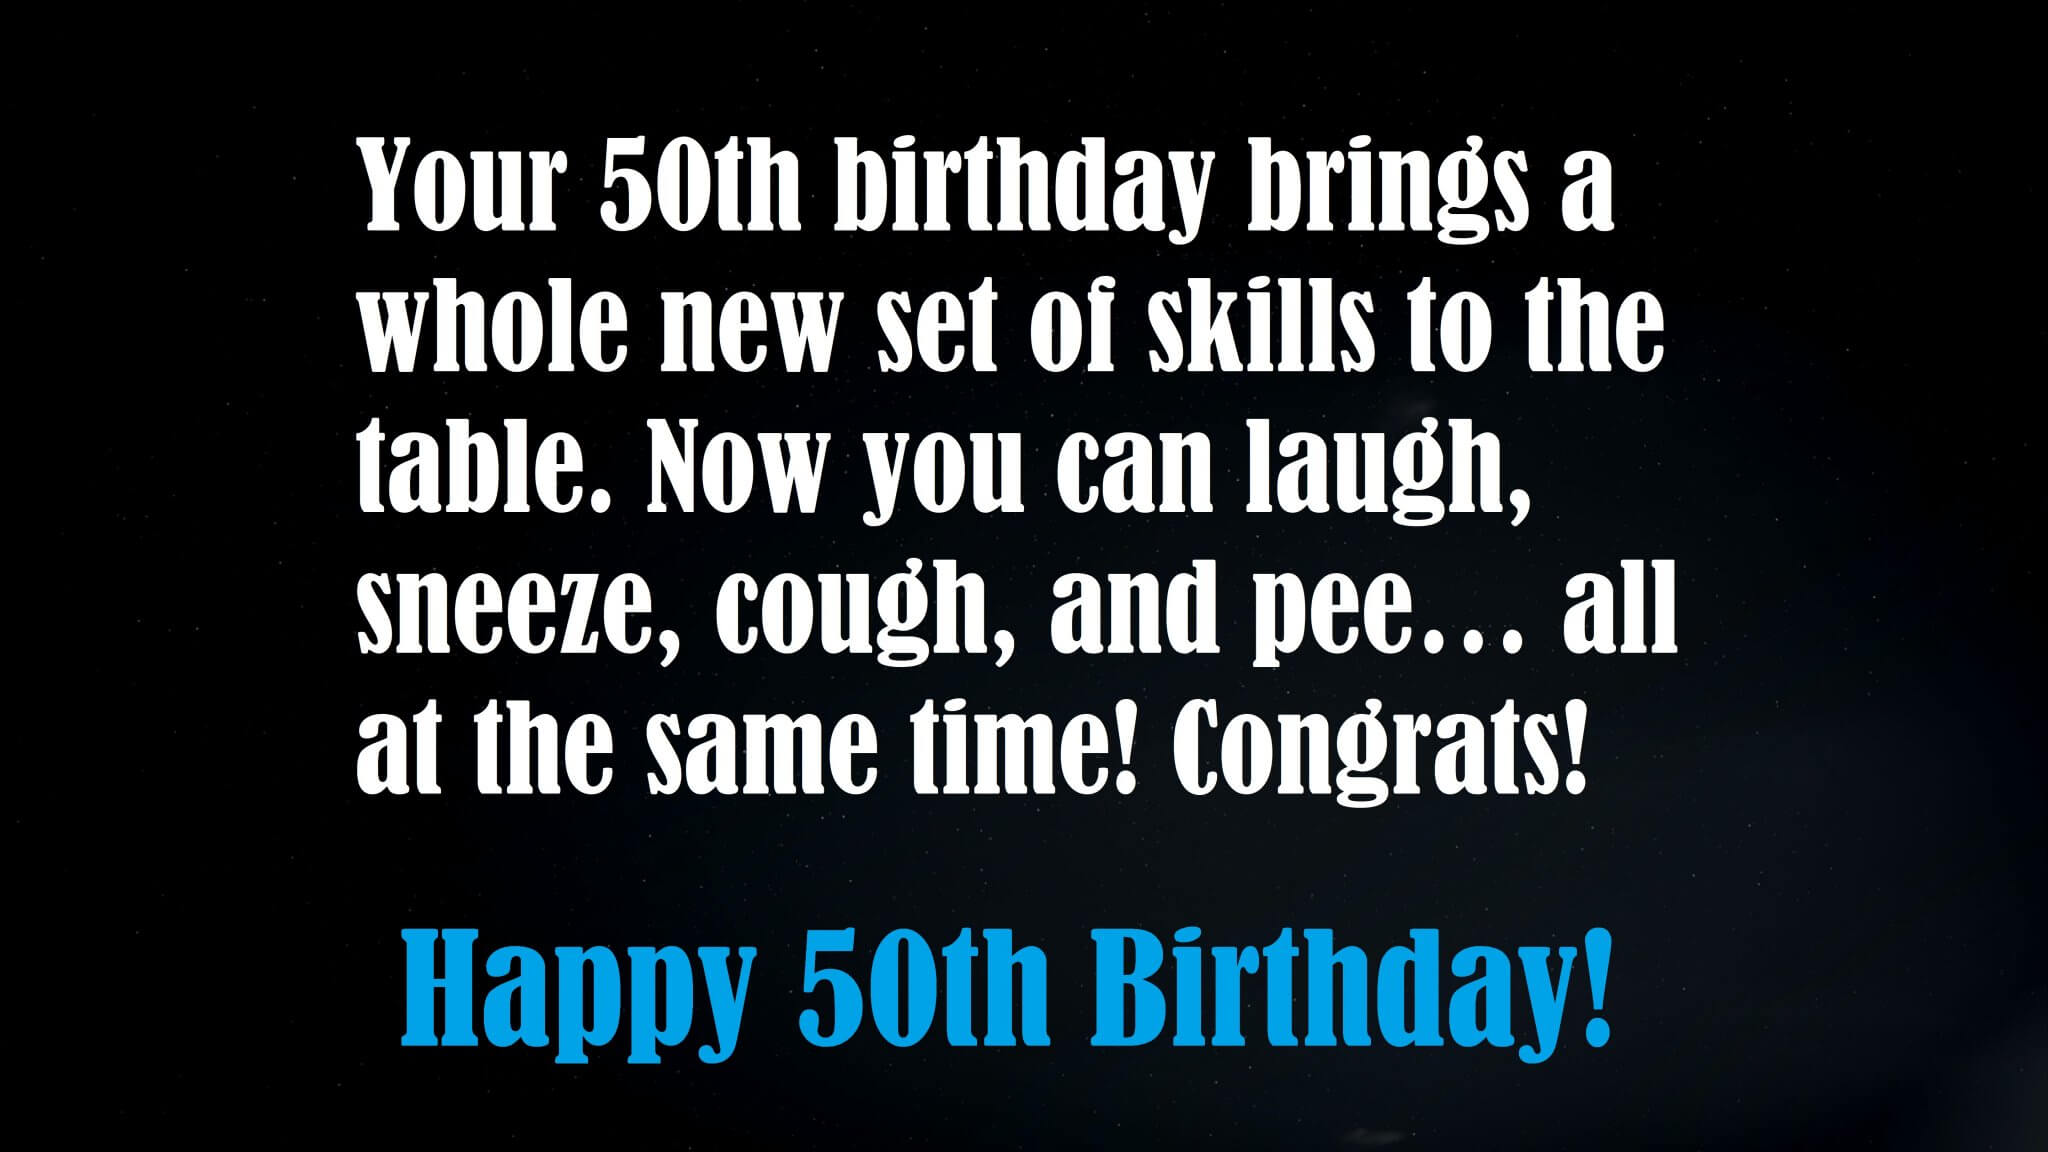 funny-50th-birthday-wishes-52-humor-messages-quotes-sayings-on-birthday